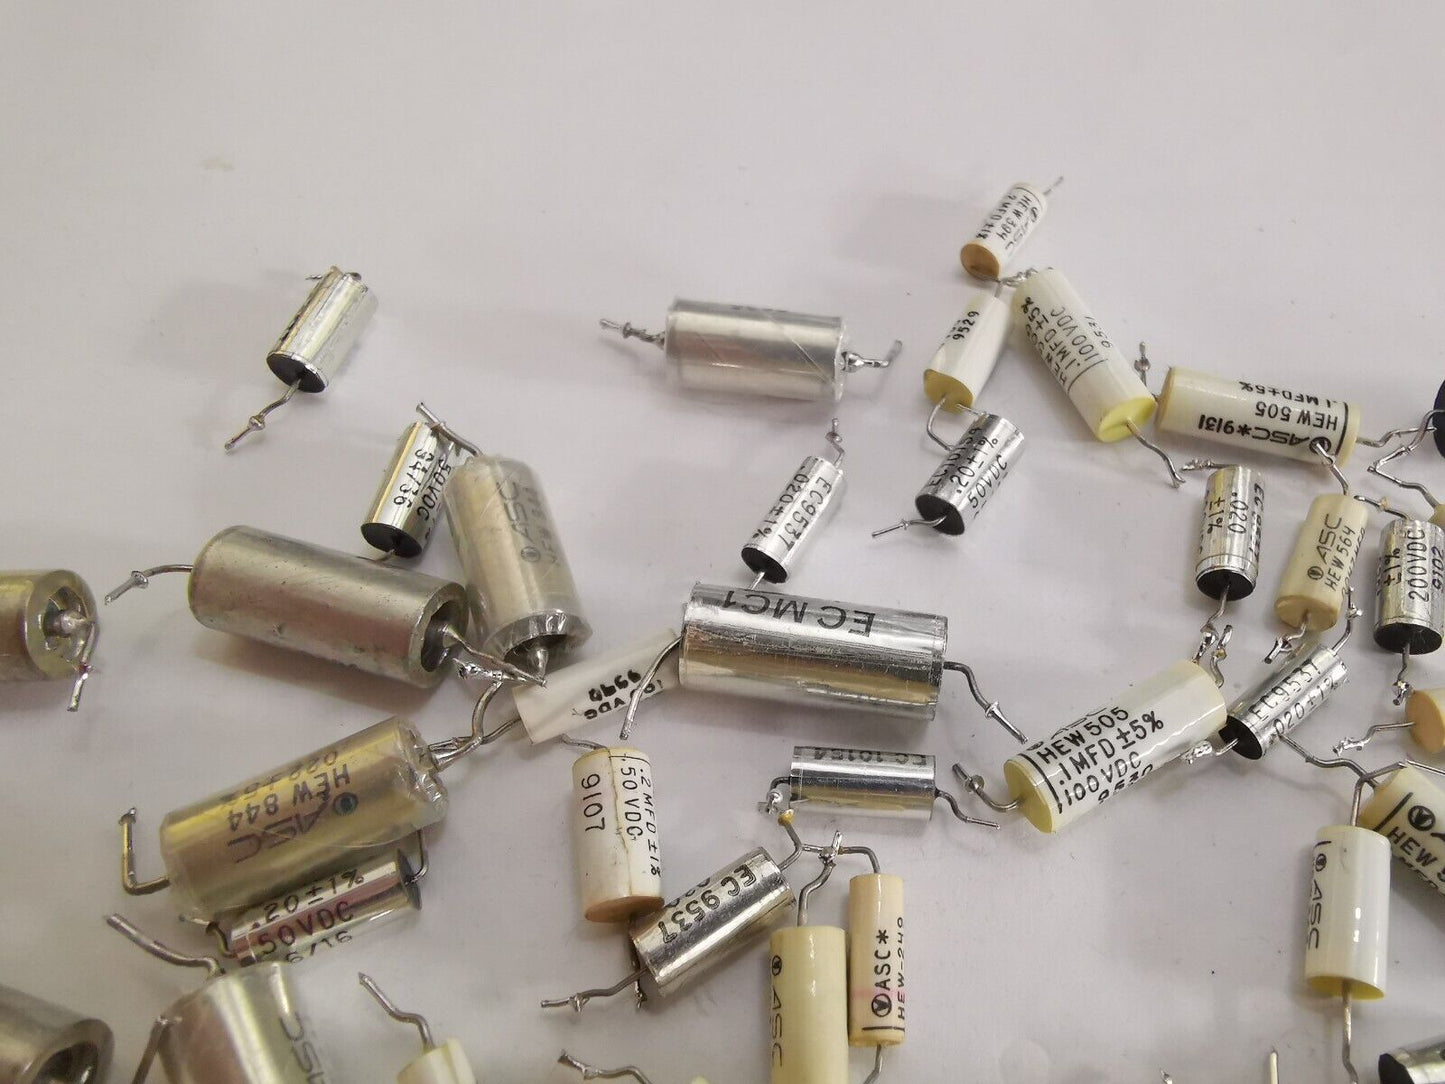 High Quality Film / Tantalum Capacitor Used For Sample And Hold Amp